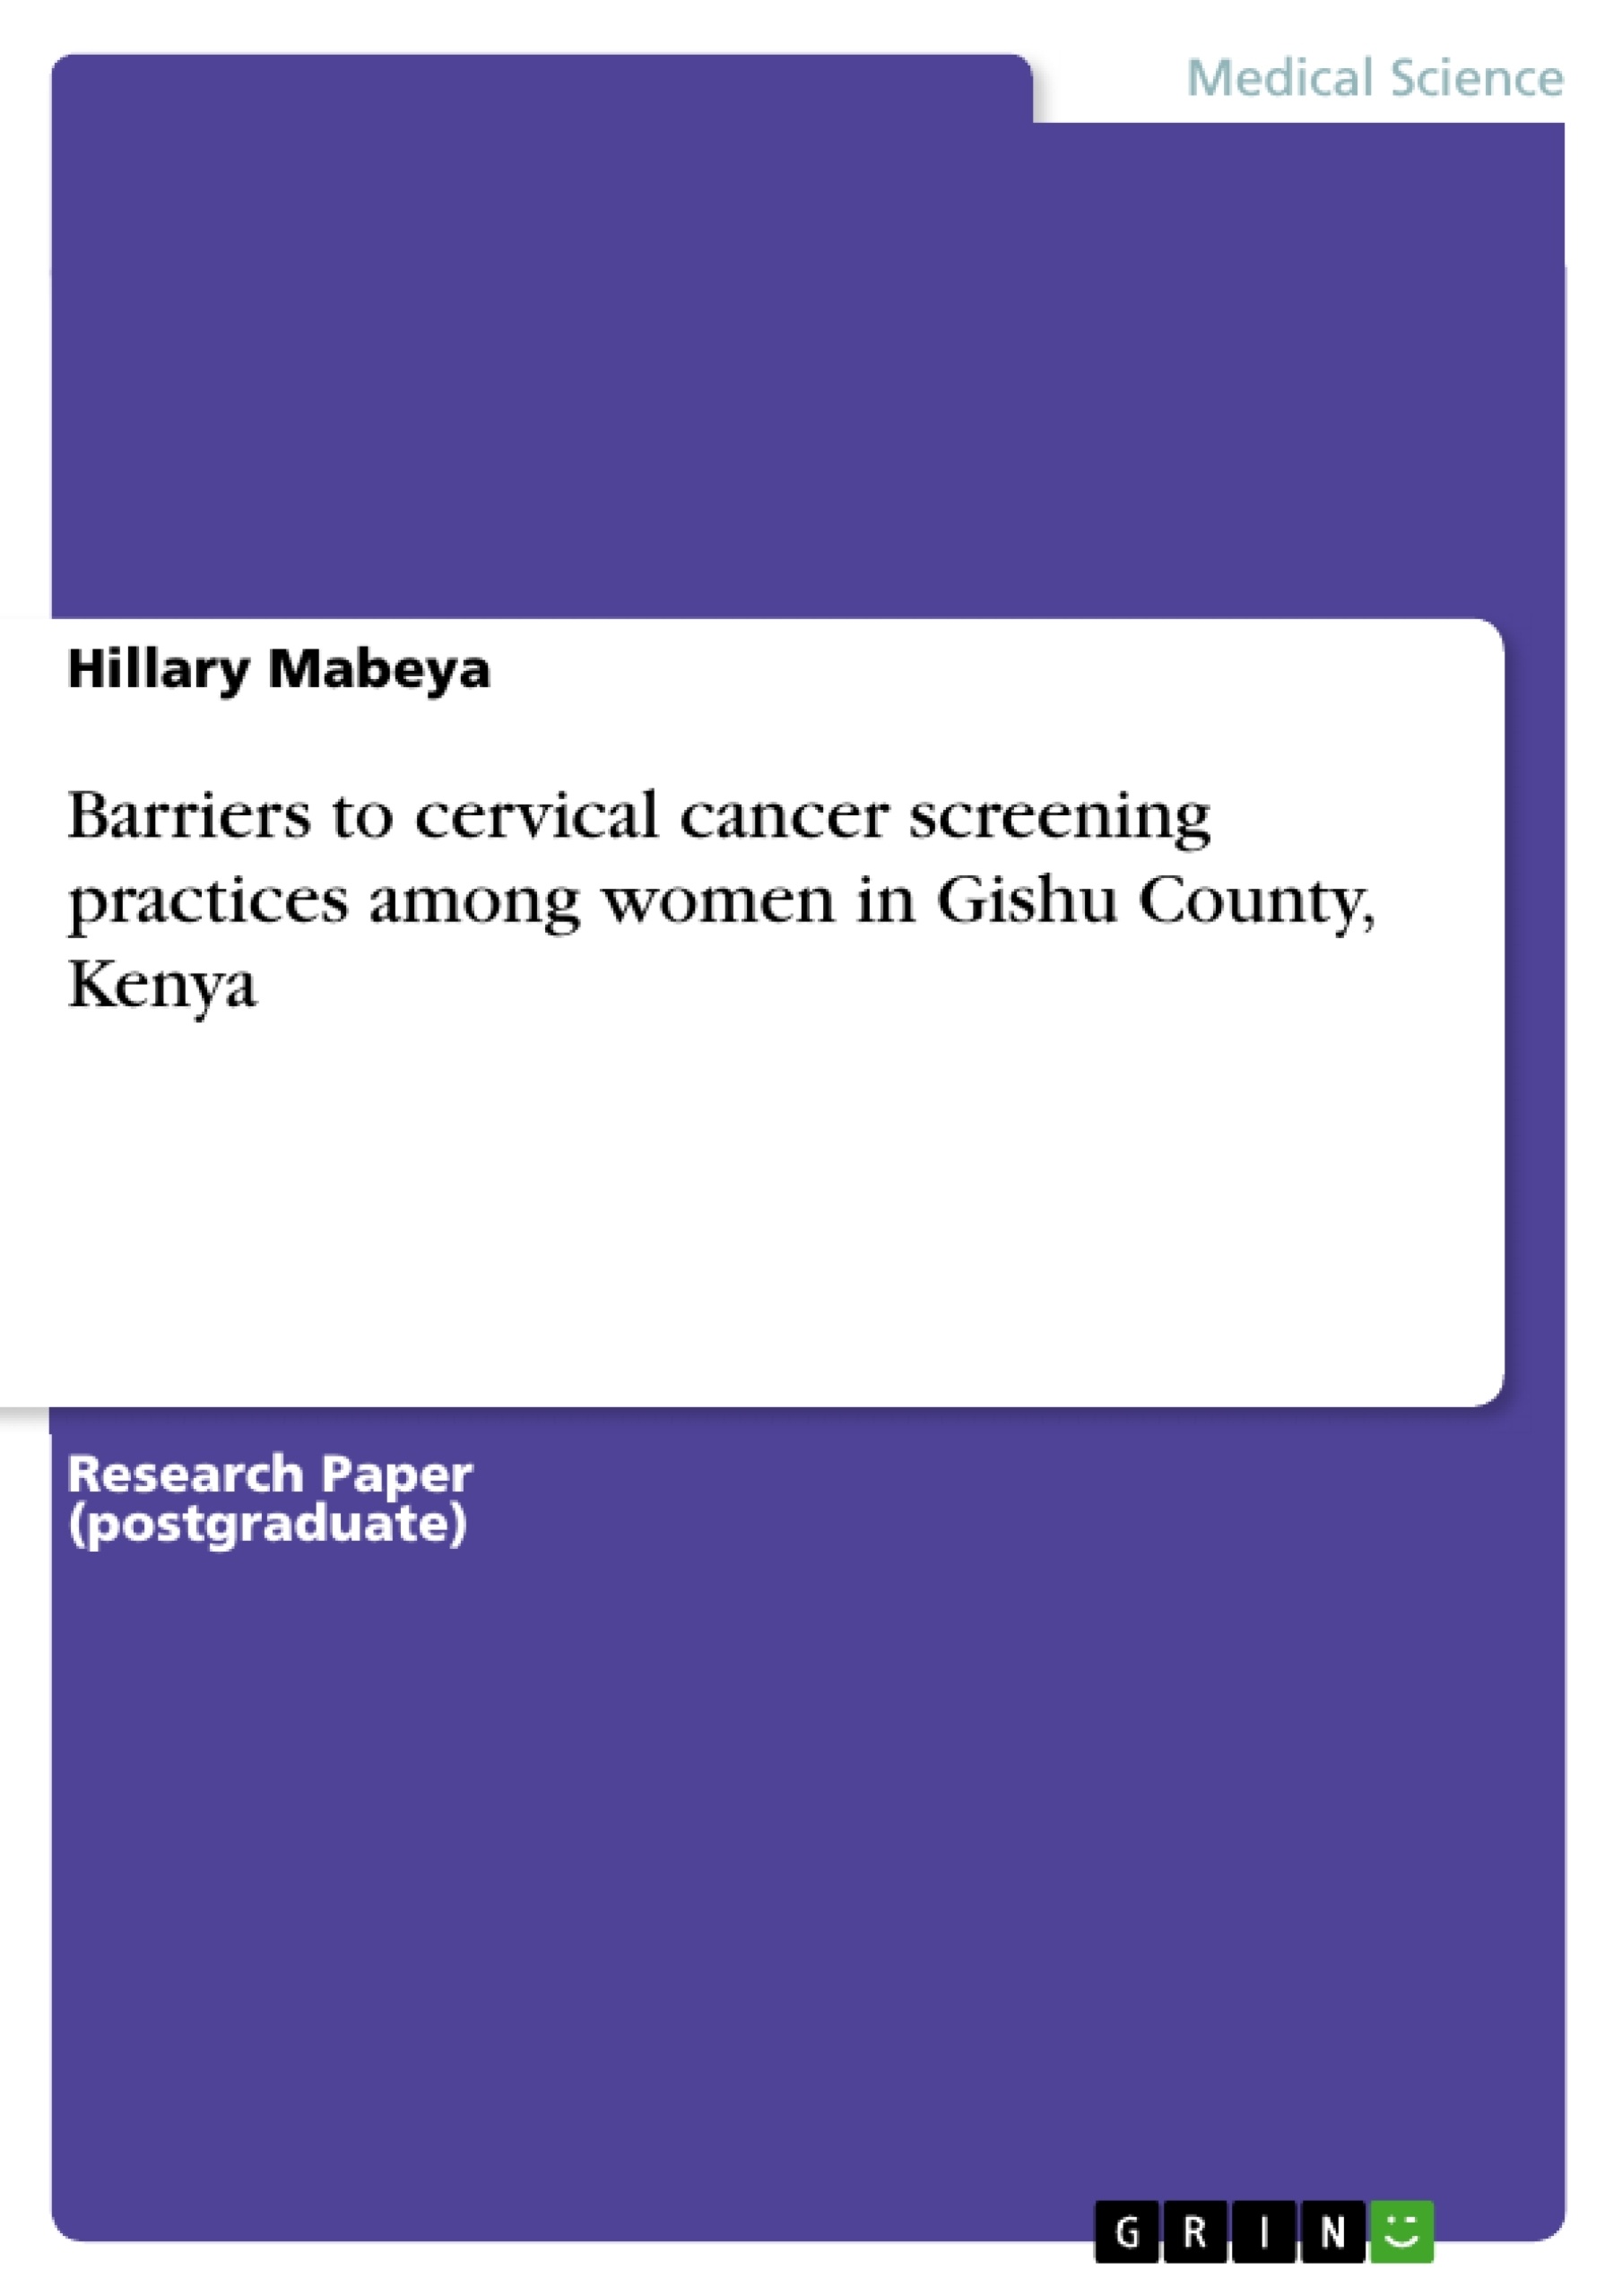 Title: Barriers to cervical cancer screening practices among women in Gishu County, Kenya